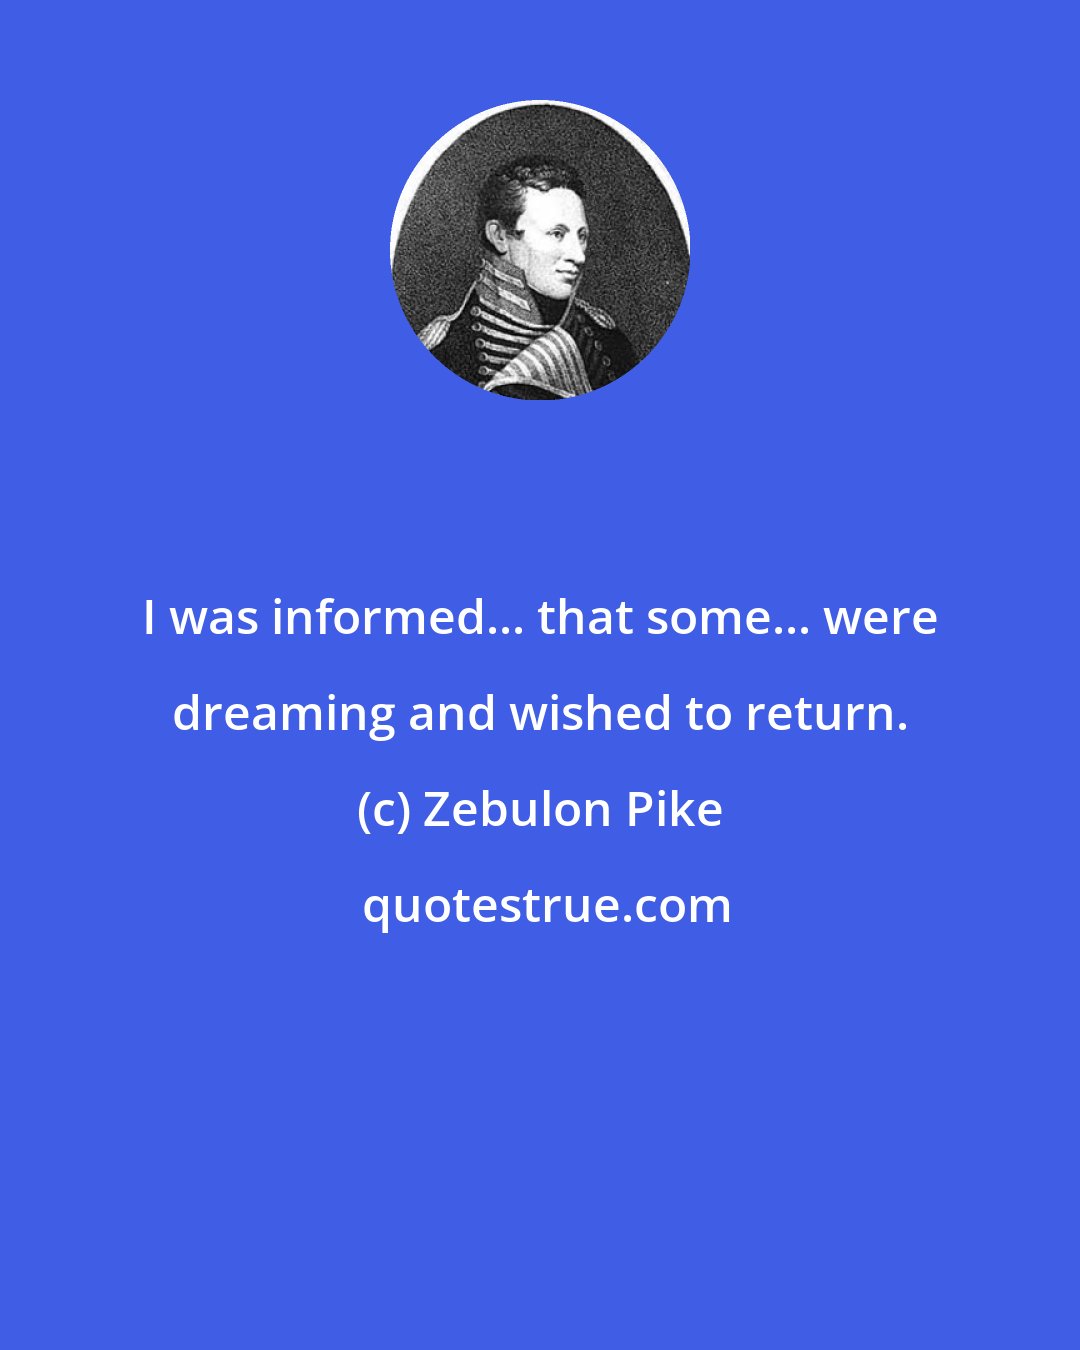 Zebulon Pike: I was informed... that some... were dreaming and wished to return.